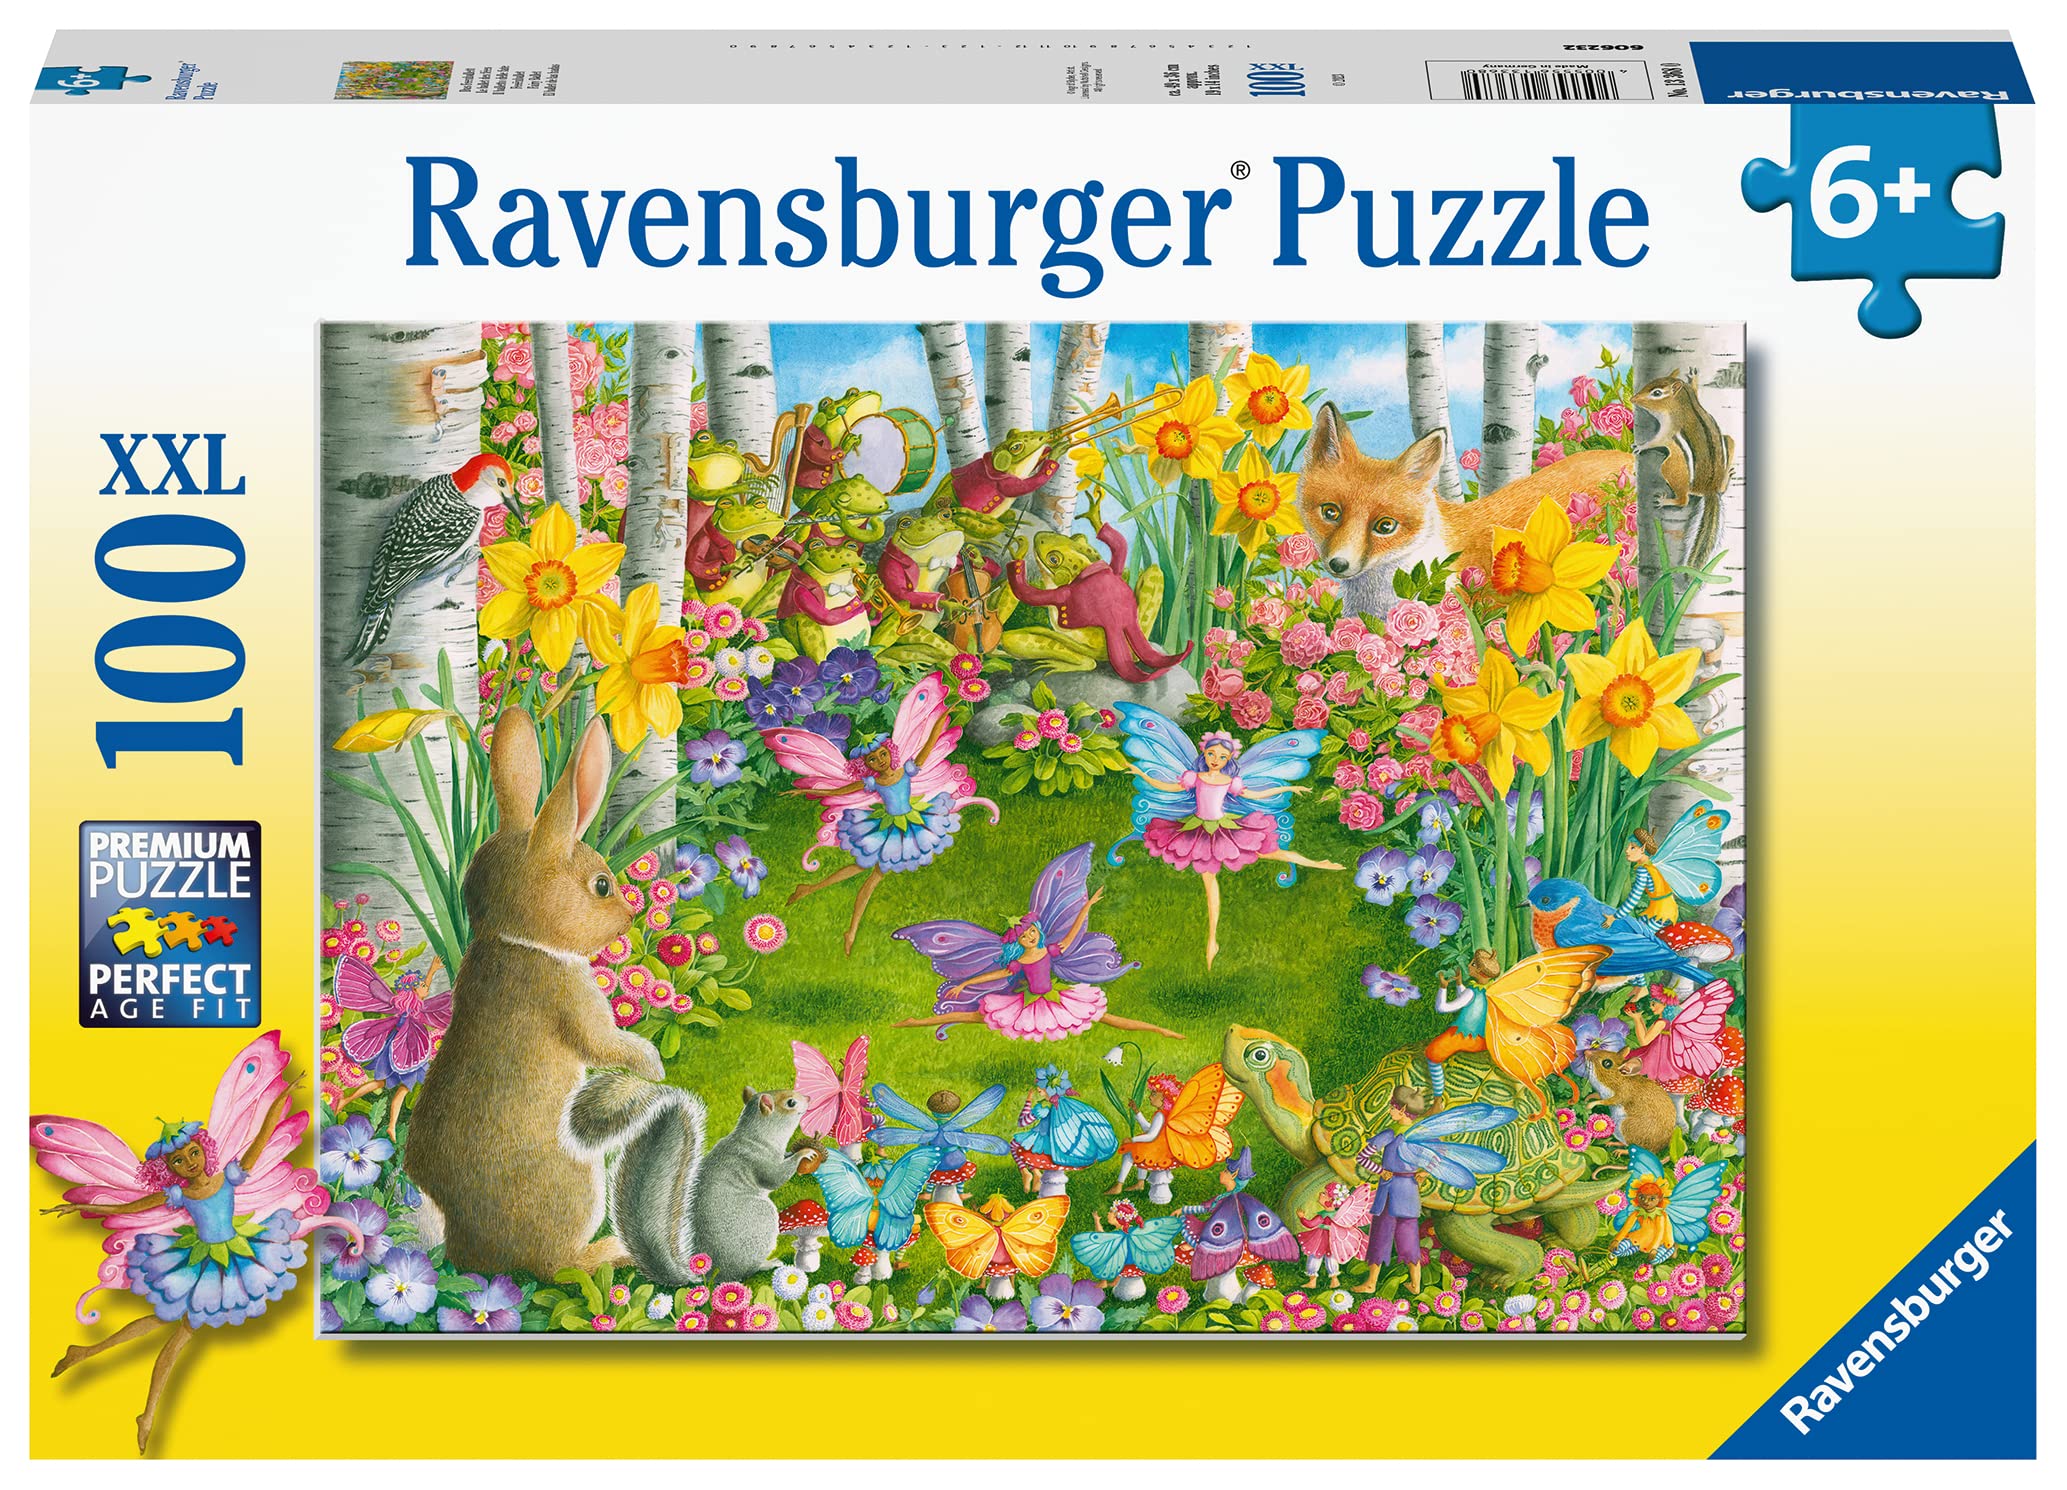 Ravensburger Fairy Ballet 100 Piece XXL Jigsaw Puzzle for Kids - 13368 - Every Piece is Unique, Pieces Fit Together Perfectly